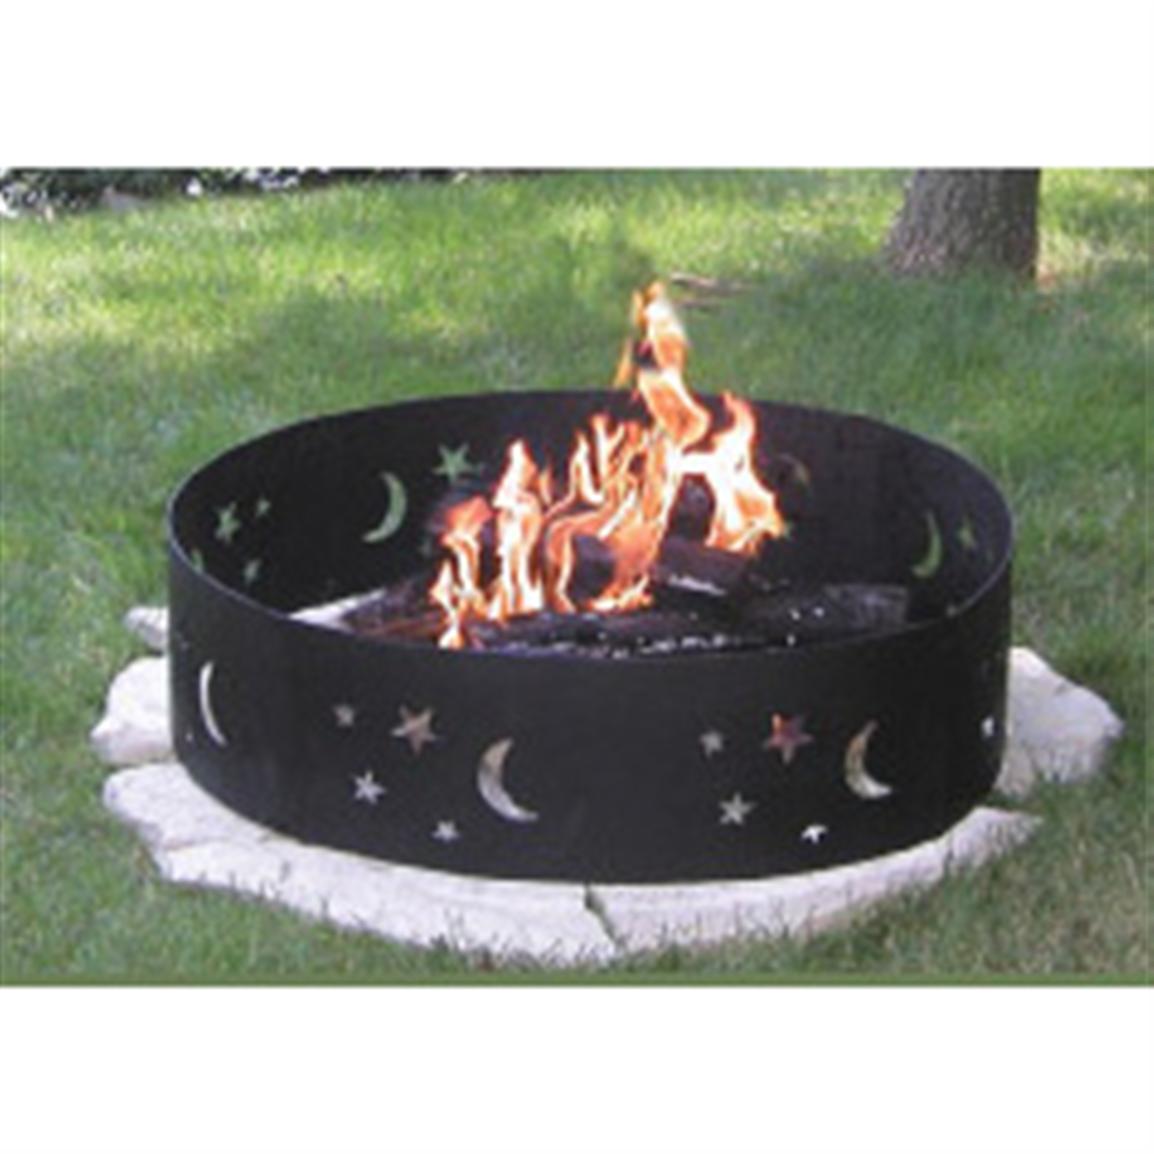 Cobraco Moon And Stars Camp Fire Ring, Moon And Stars Fire Pit